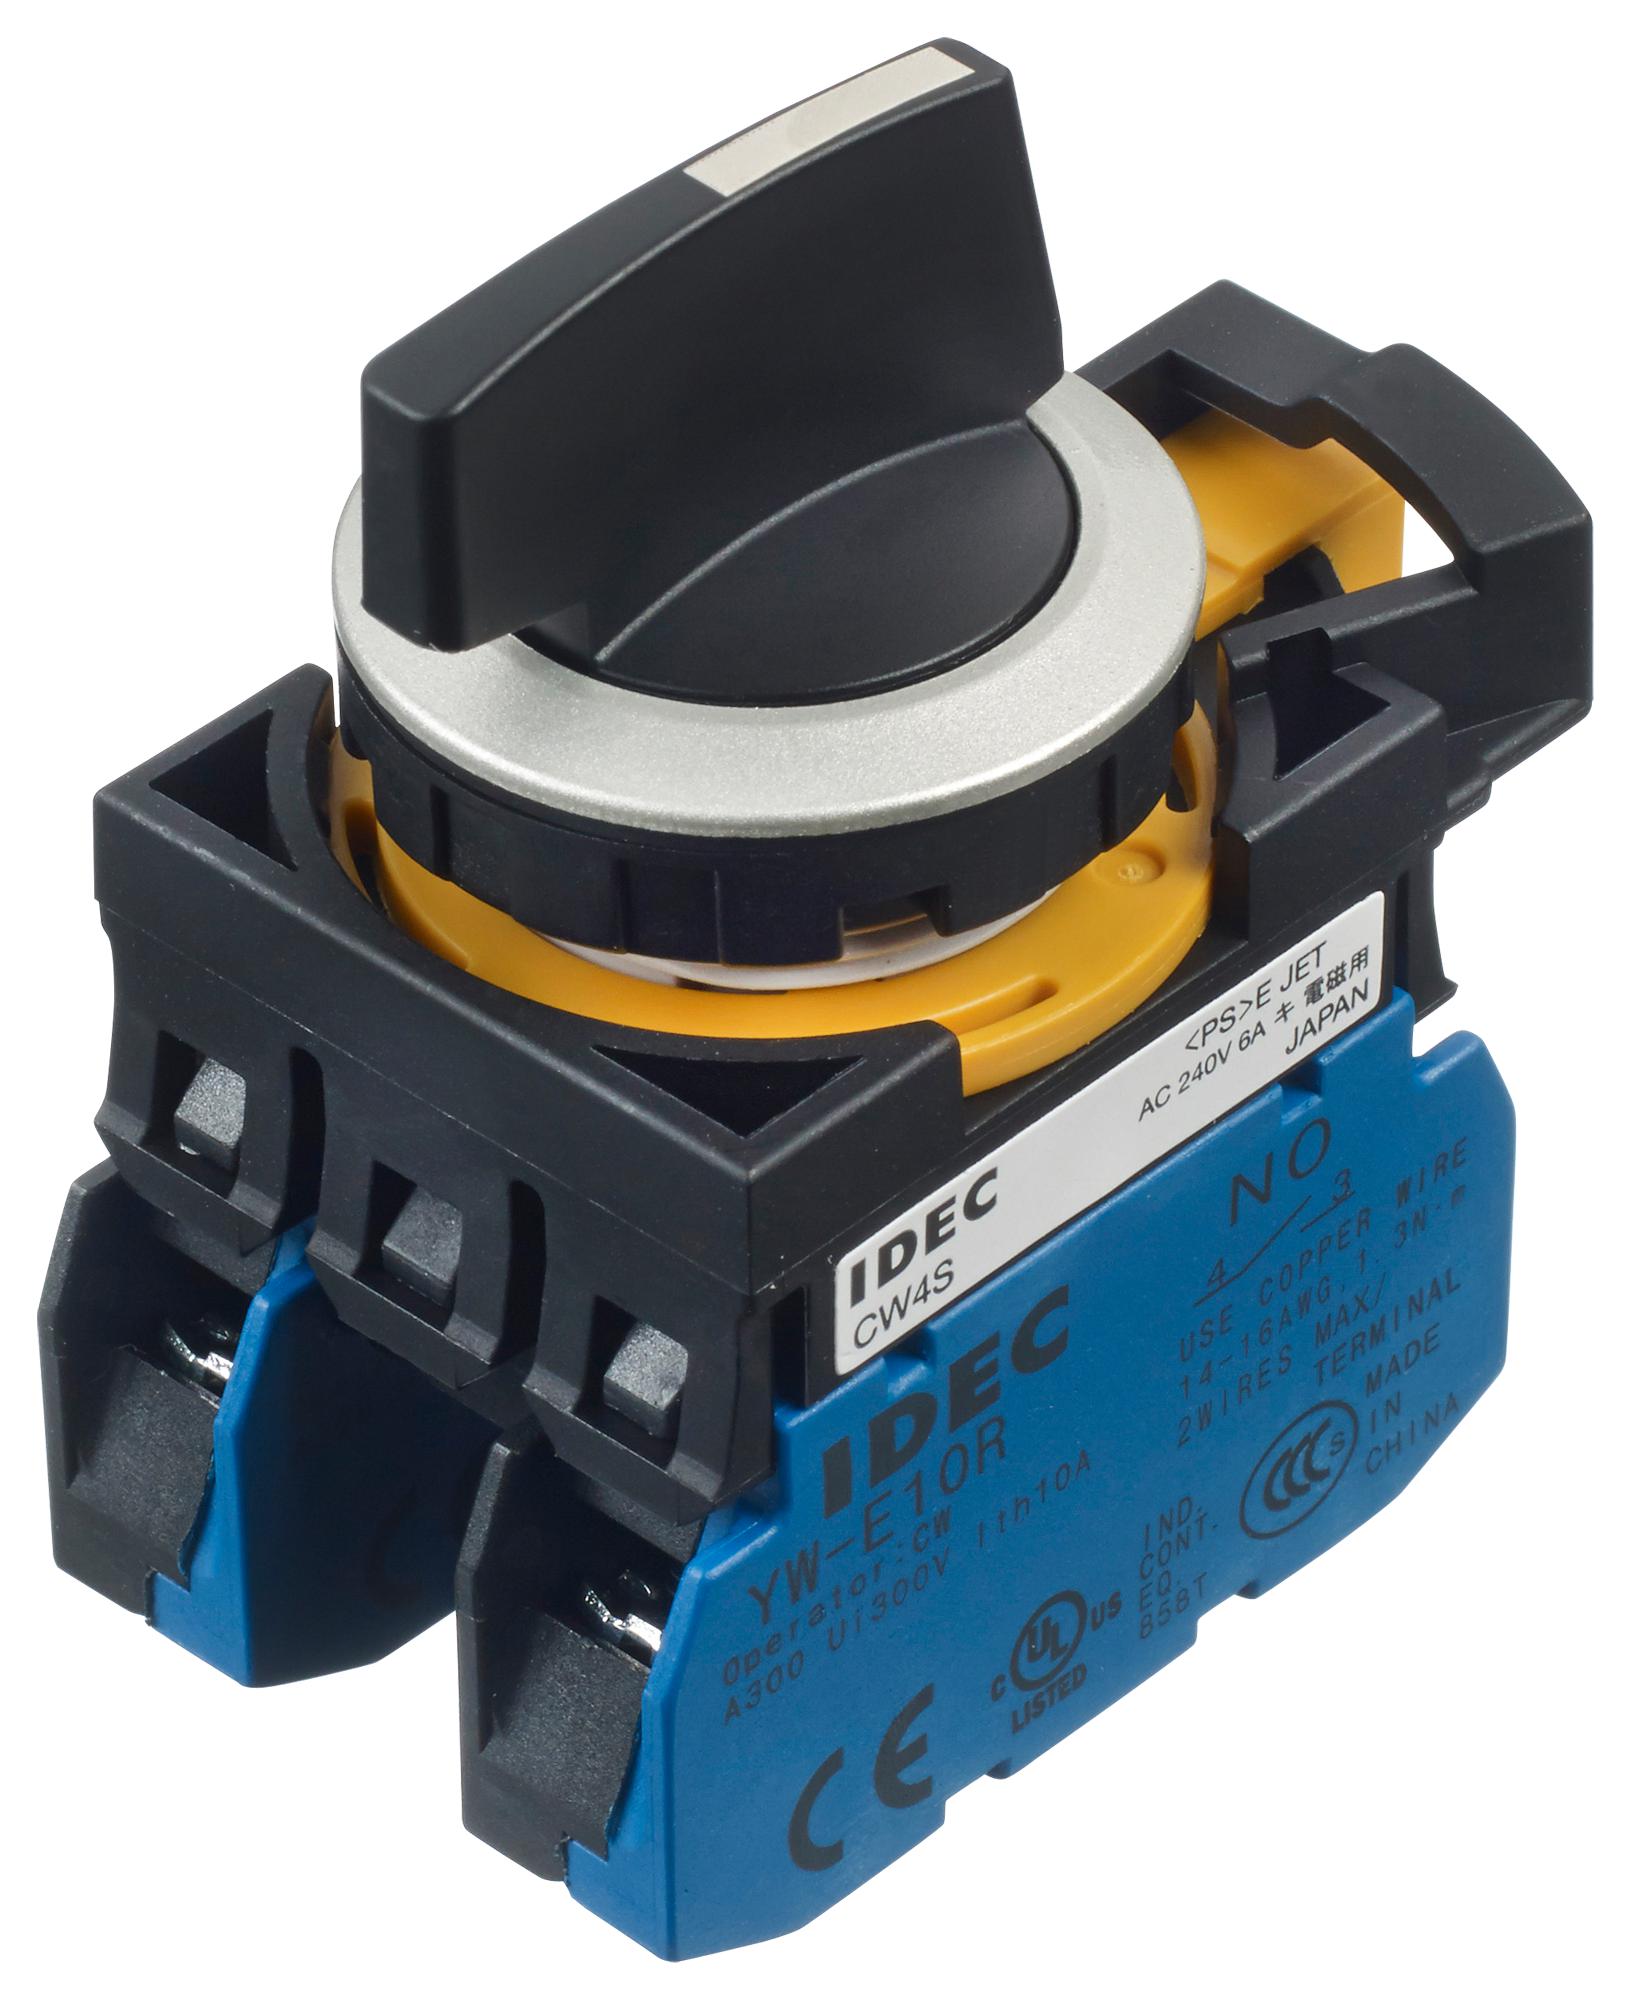 CW4S-31LE20 ROTARY SWITCH, 3 POS, 10A, 240VAC IDEC